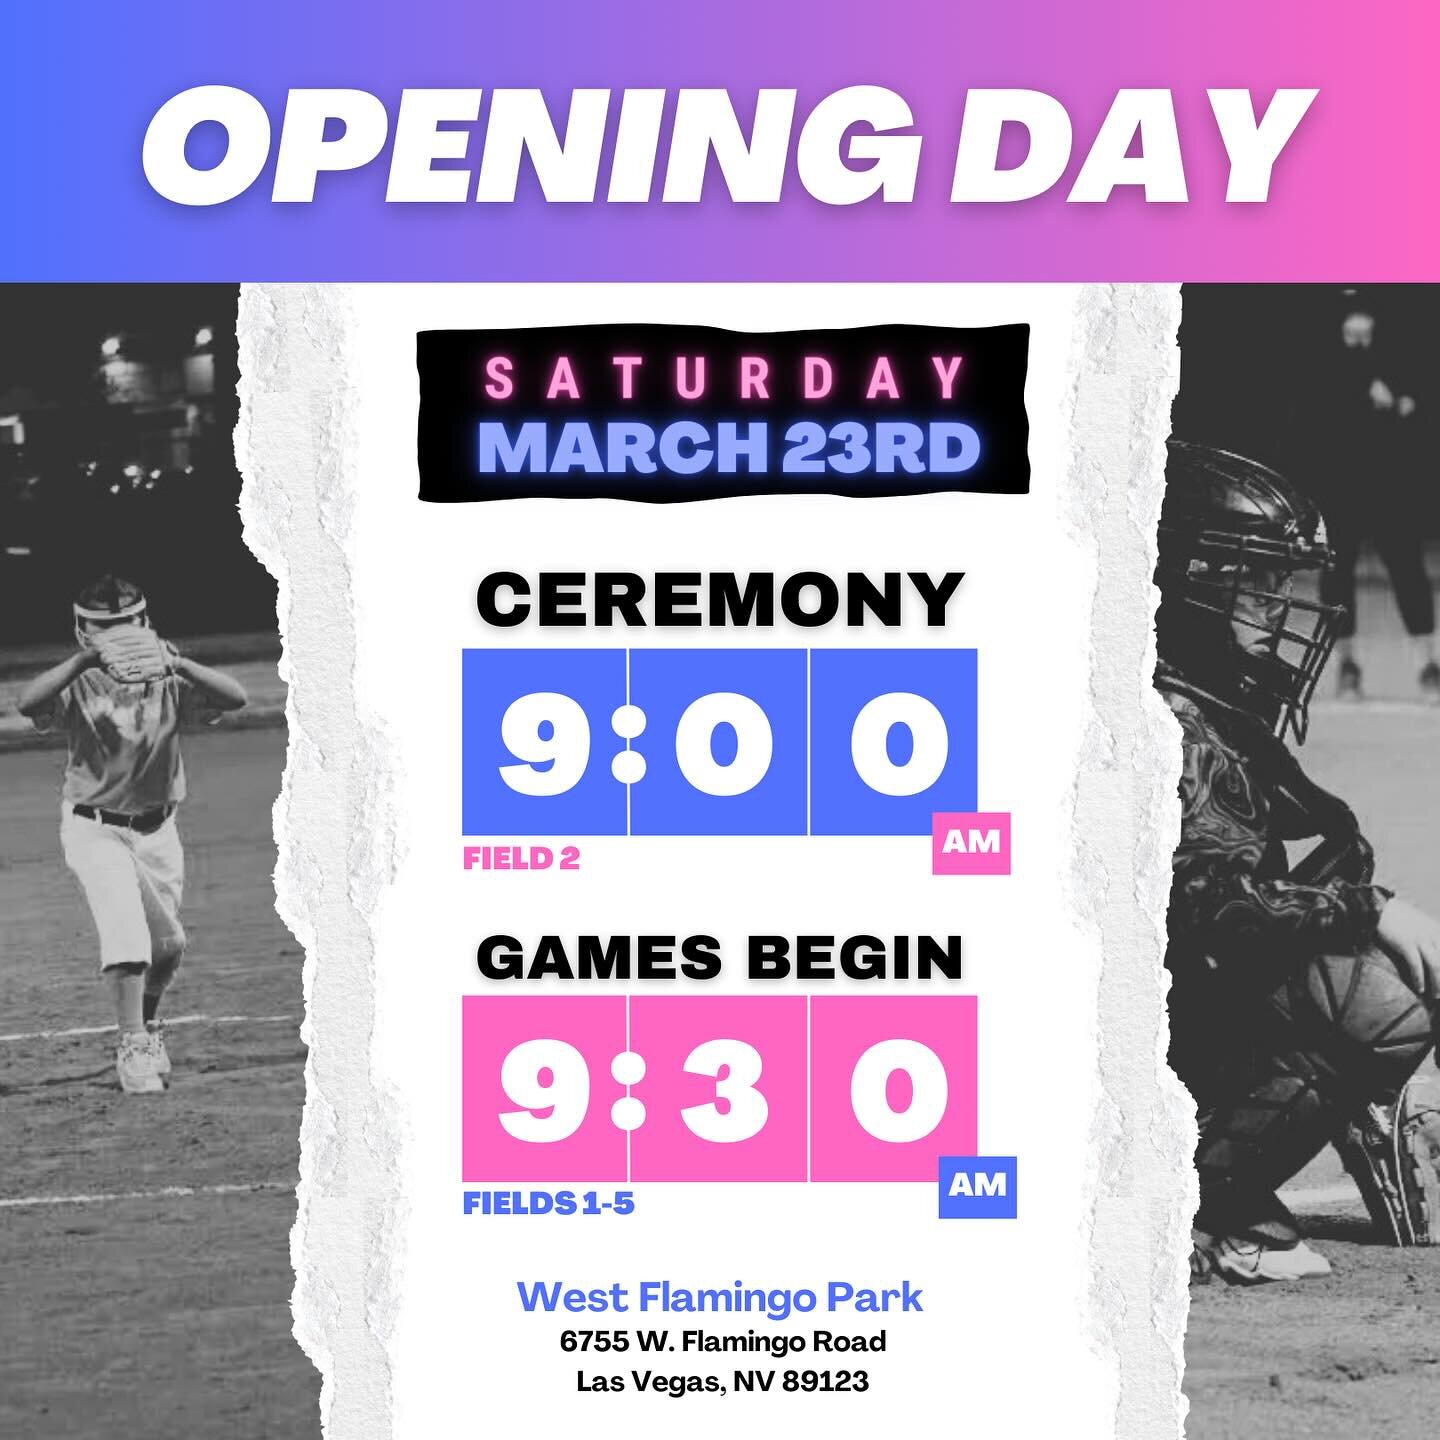 🎉 Our Opening Day is this Saturday, March 23rd! 🎉

Games are officially here for the Spring season! 🌸
Join us in kicking off the season right with a welcome ceremony and day filled with games. The ceremony will be held on field 2 at 9am. SVGS team